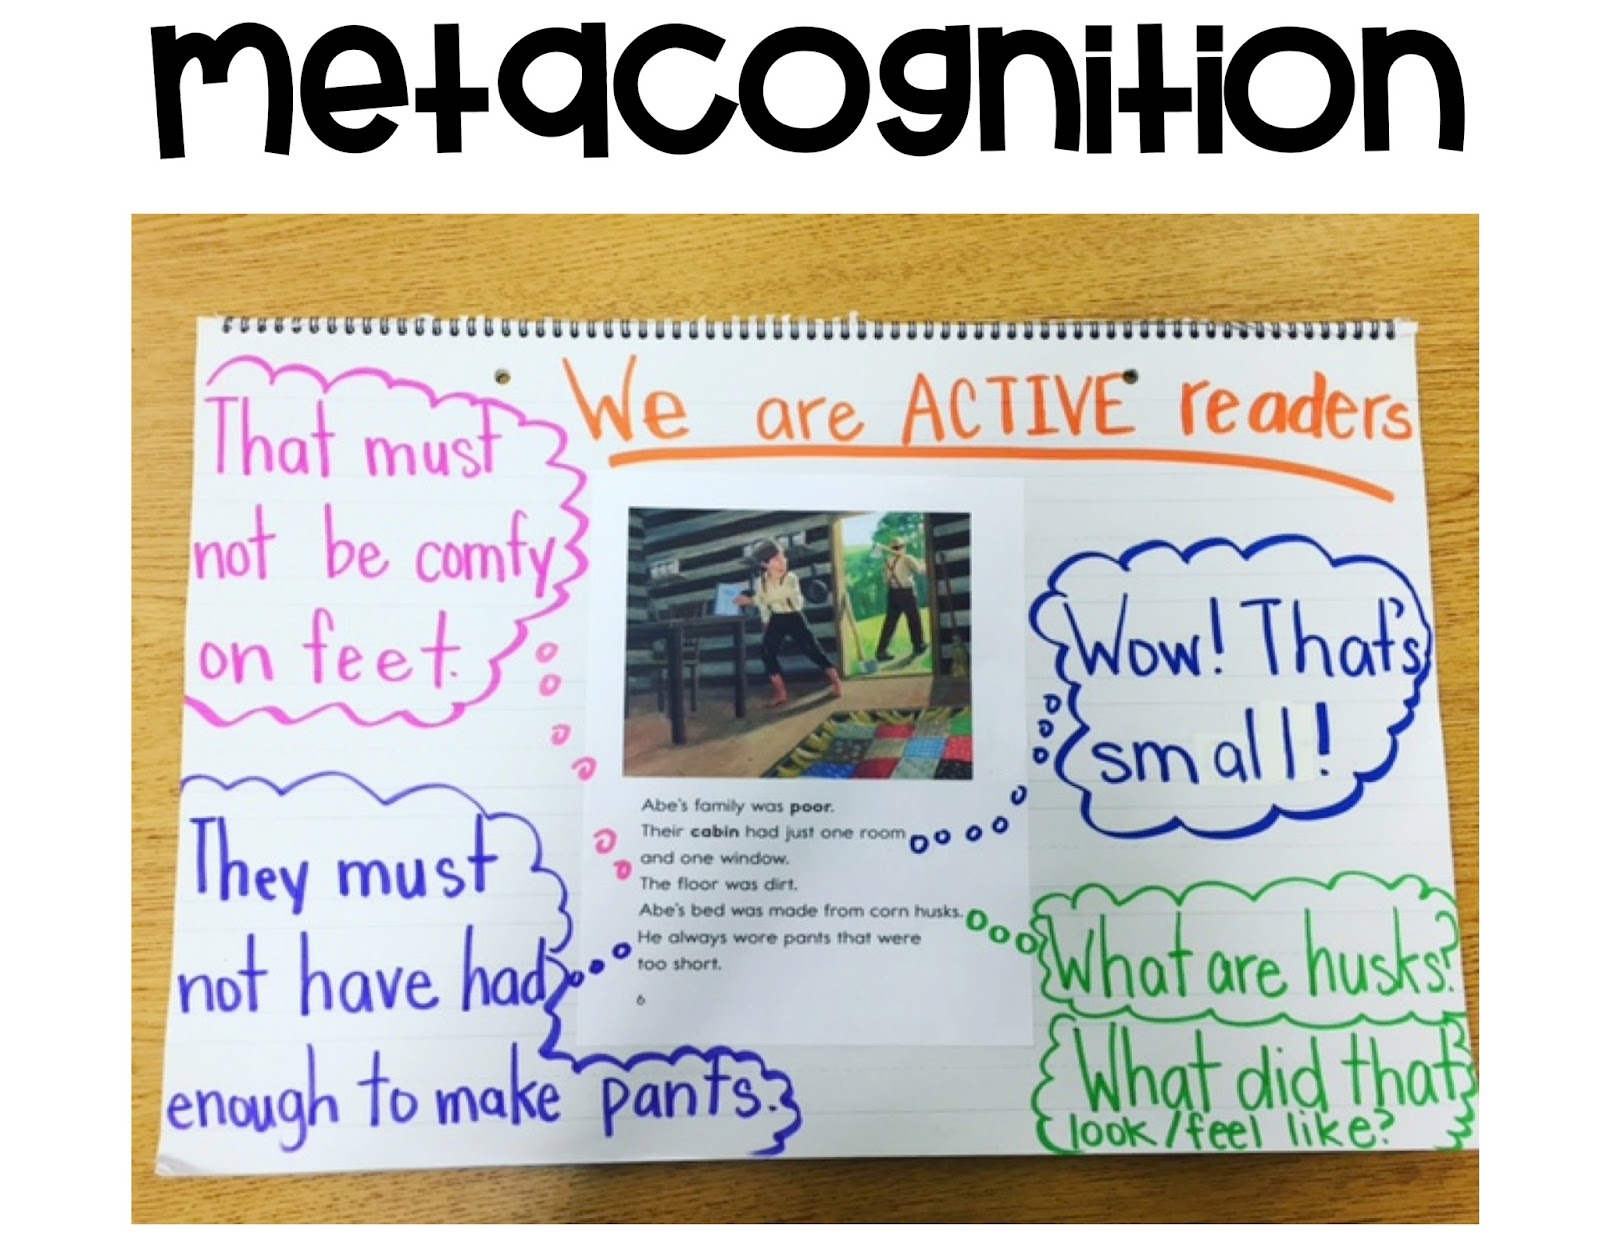 Metacognitive Markers Anchor Chart - Close Reading by In Seventh